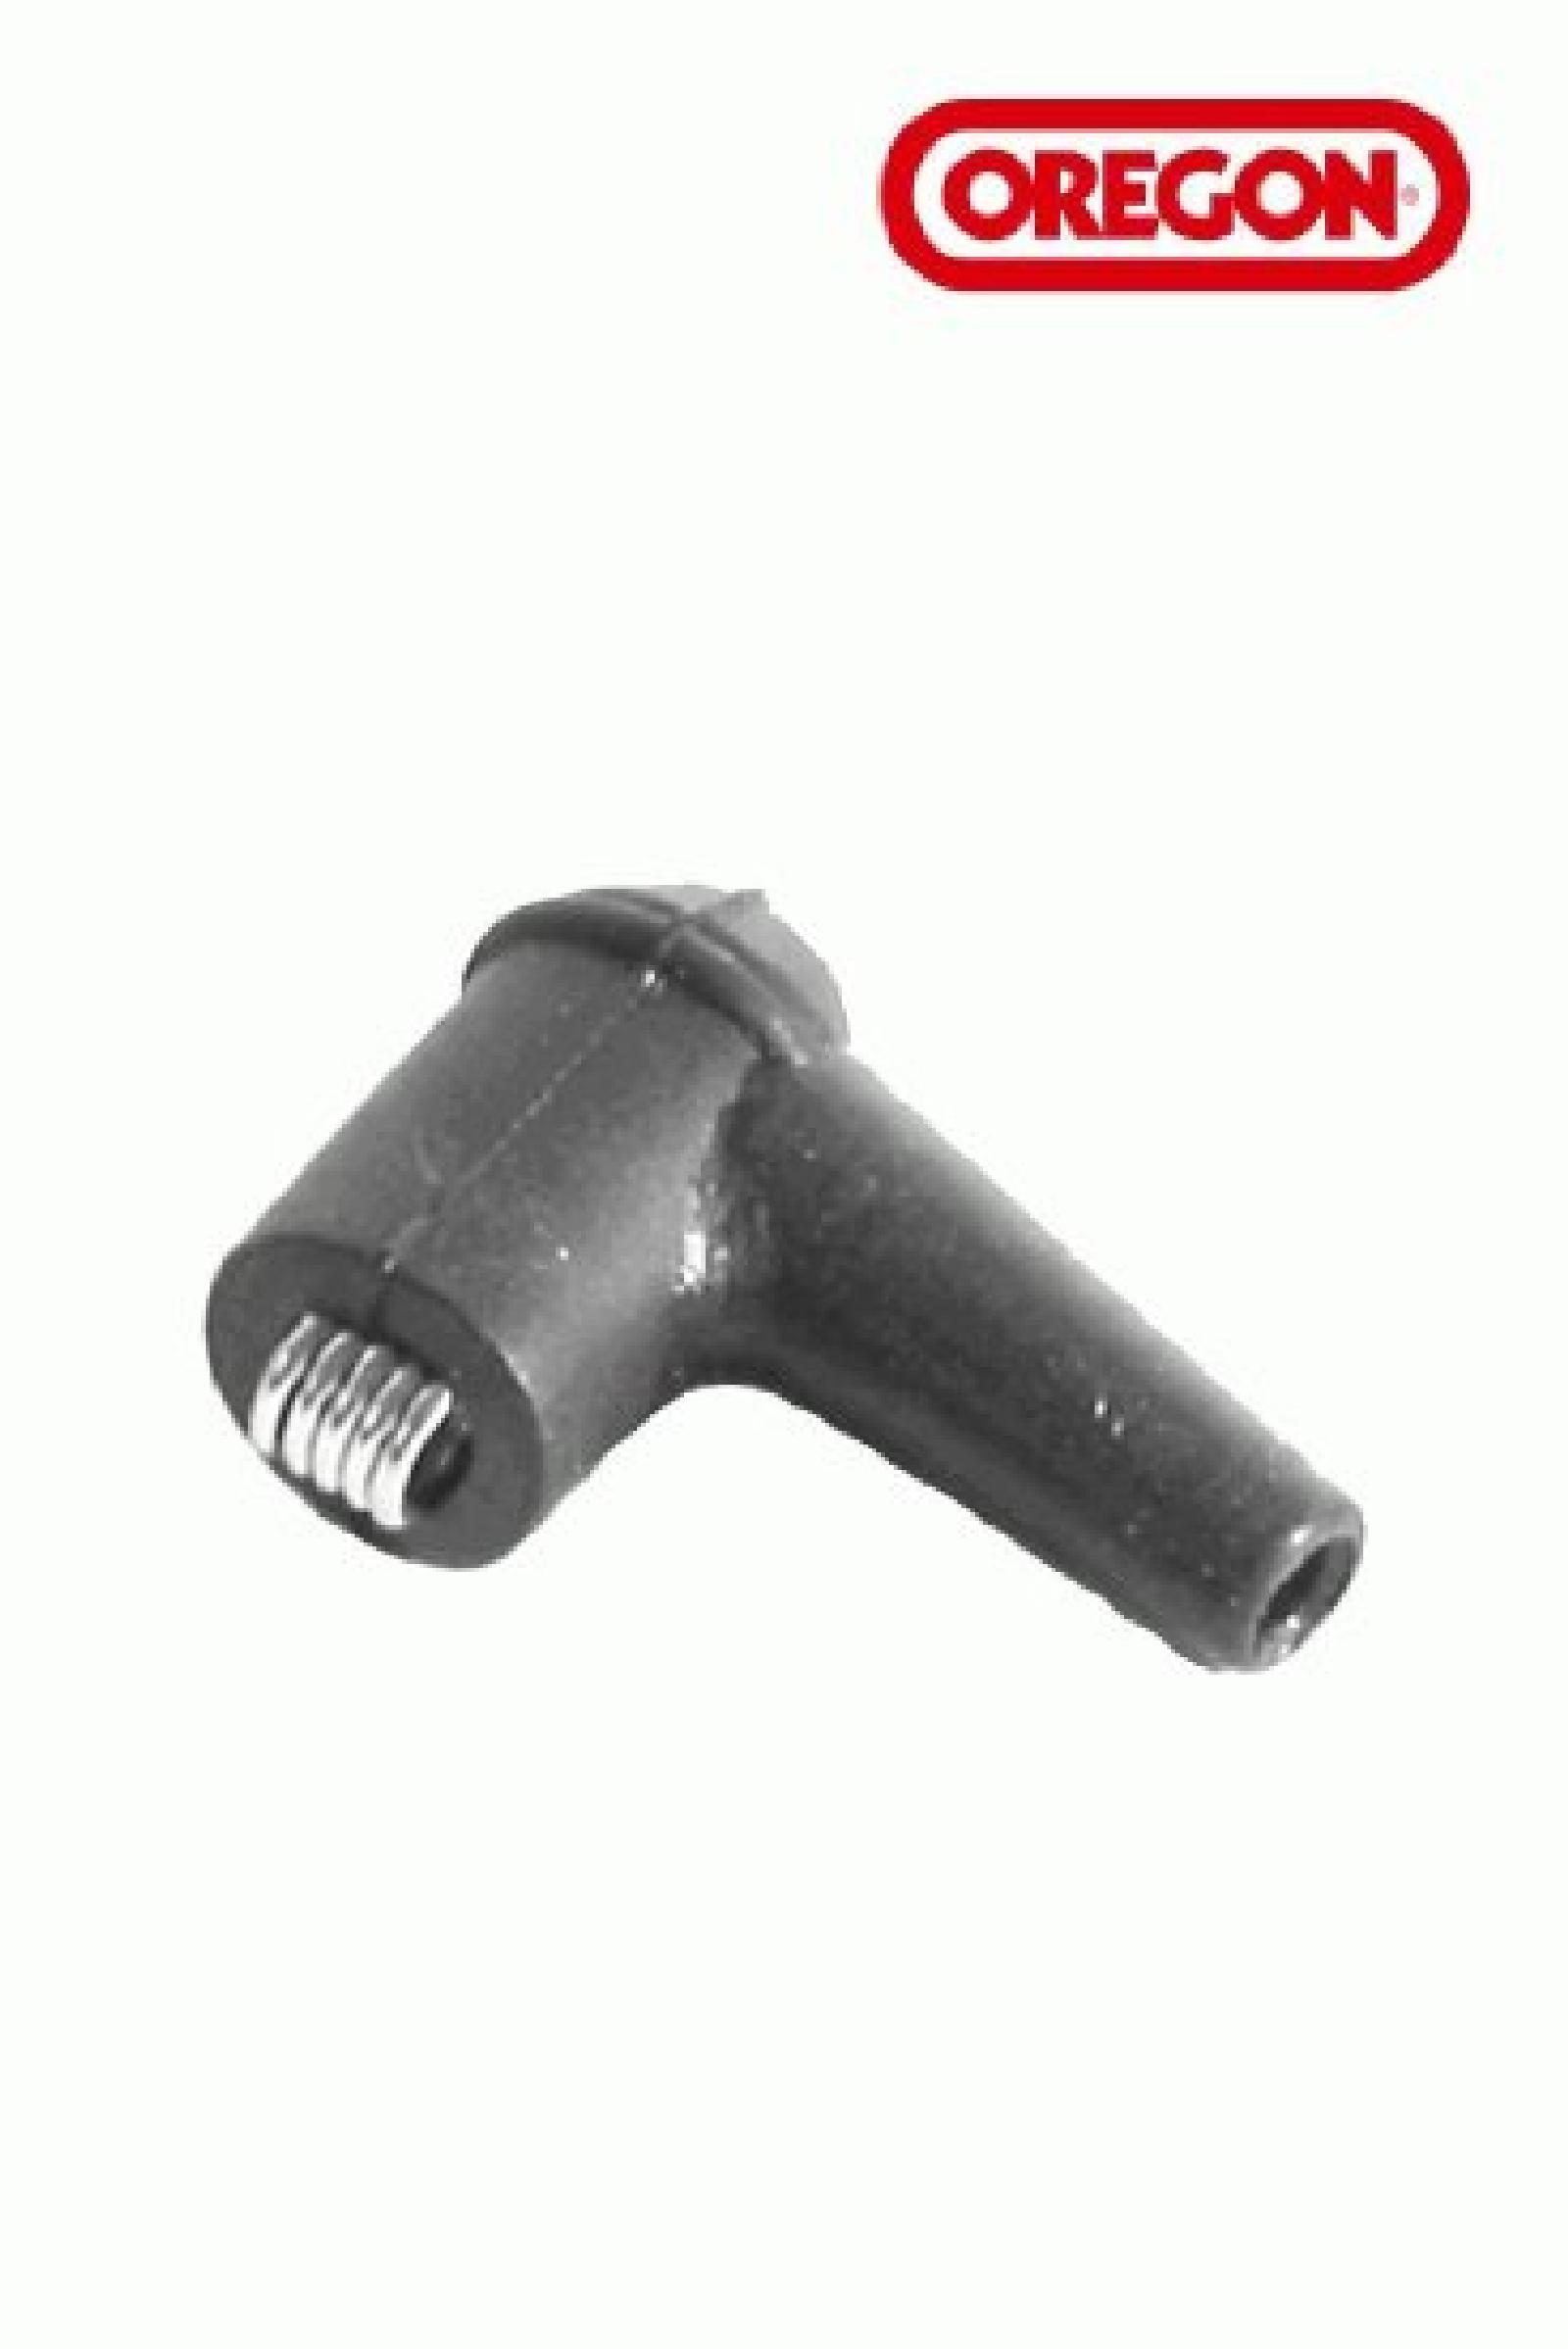 SPARK PLUG BOOT 90 DEGREE part# 33-204 by Oregon